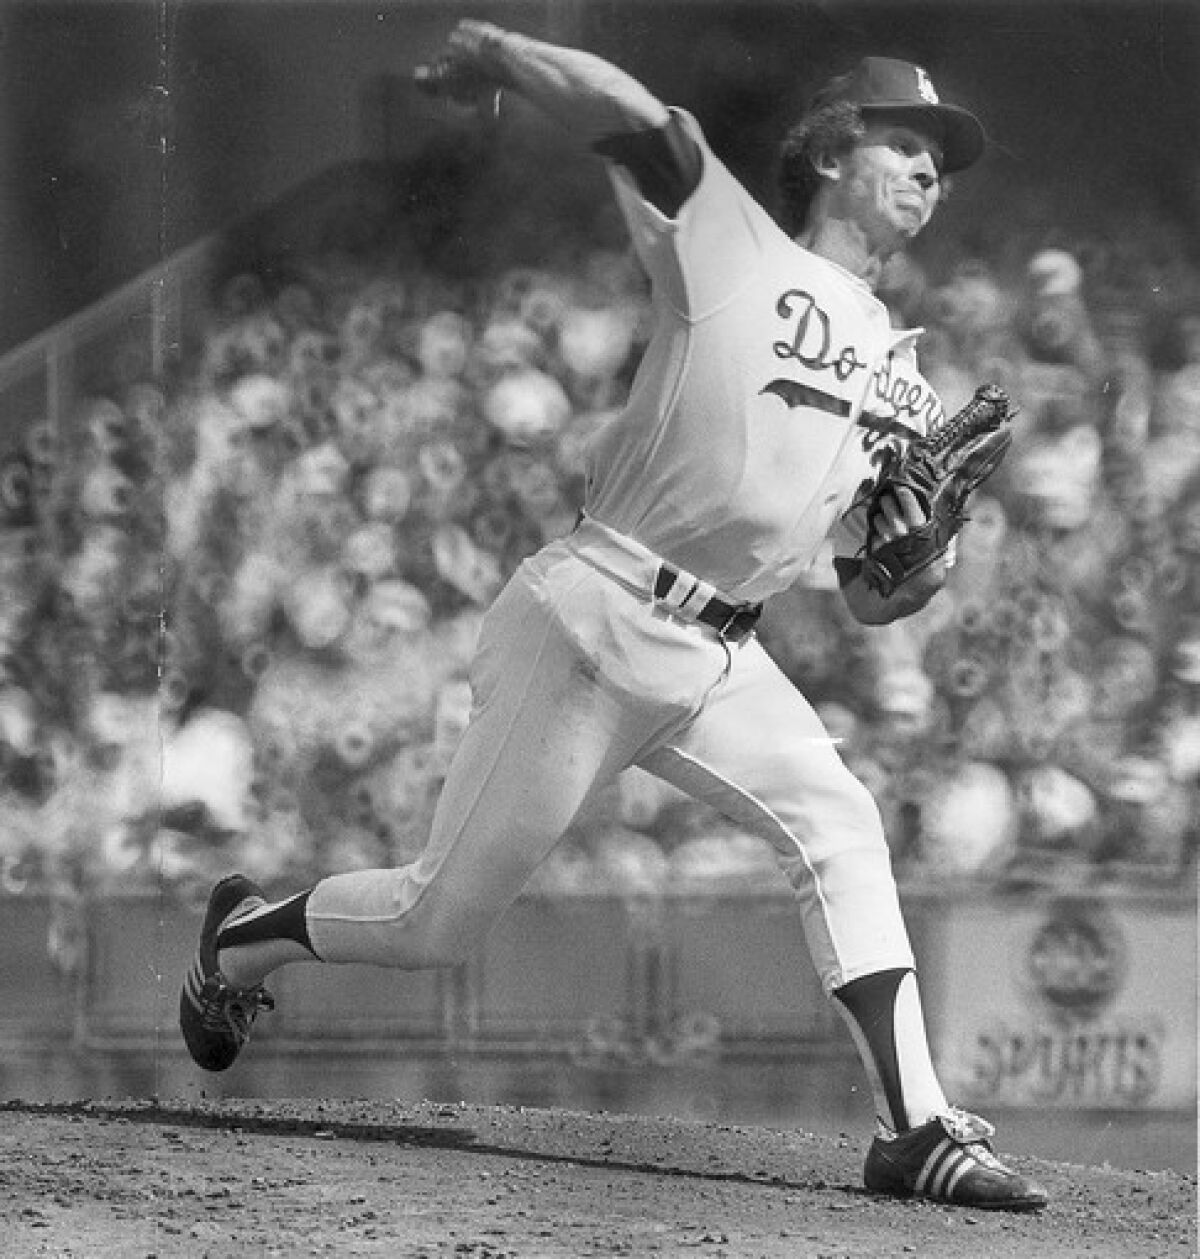 Don Sutton started out on the long road to the Hall of Fame on this date in 1966 when he made his major league debut against the Houston Astros at Dodger Stadium.